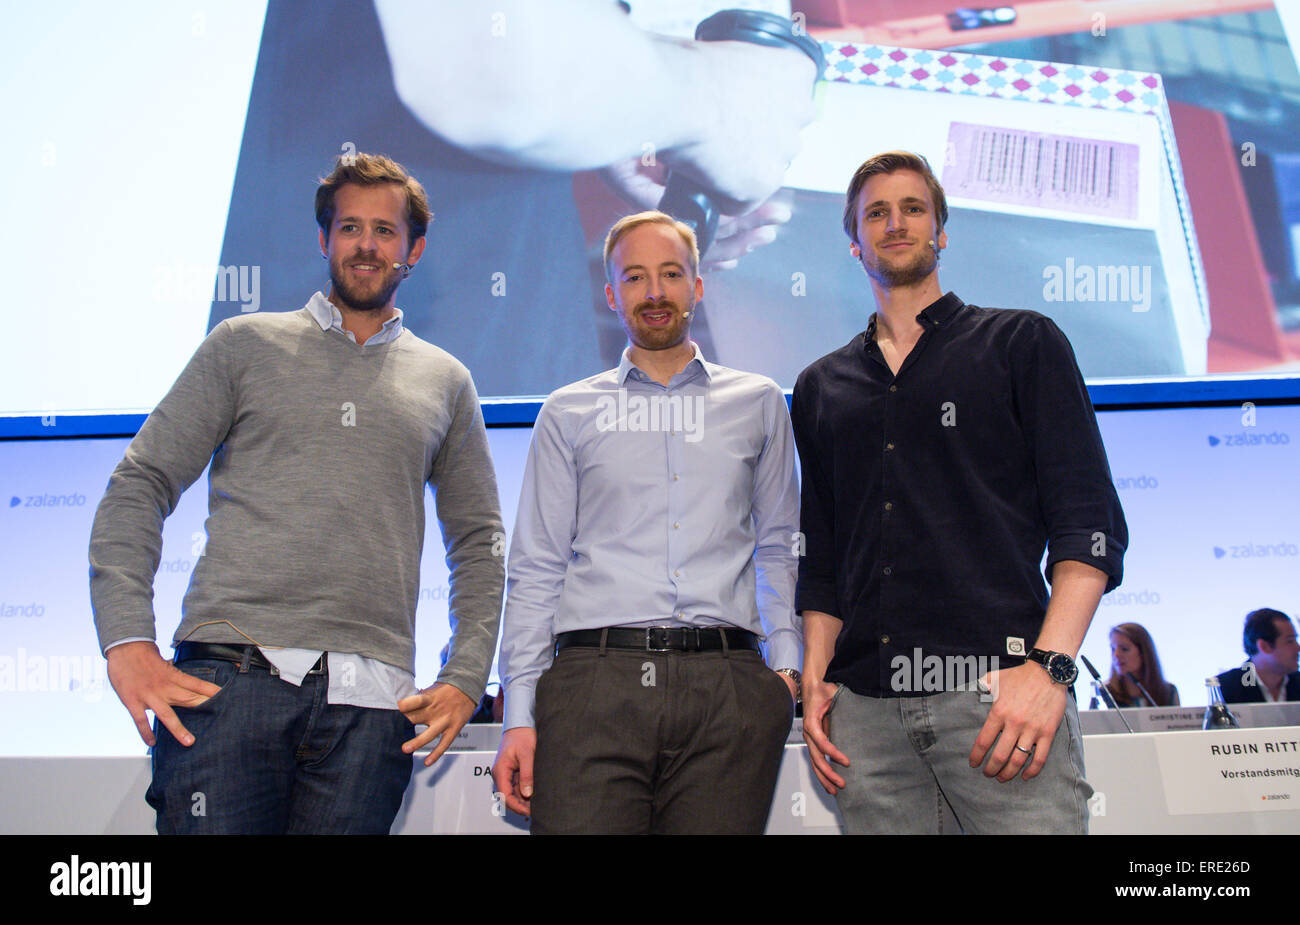 The founders and Chairmen of Zalando SE, Robert Gentz (L), David Schneider  (R), and Rubin Ritter (C), stand on stage at the start of the Zalando SE  shareholders' meeting in Berlin, Germany,